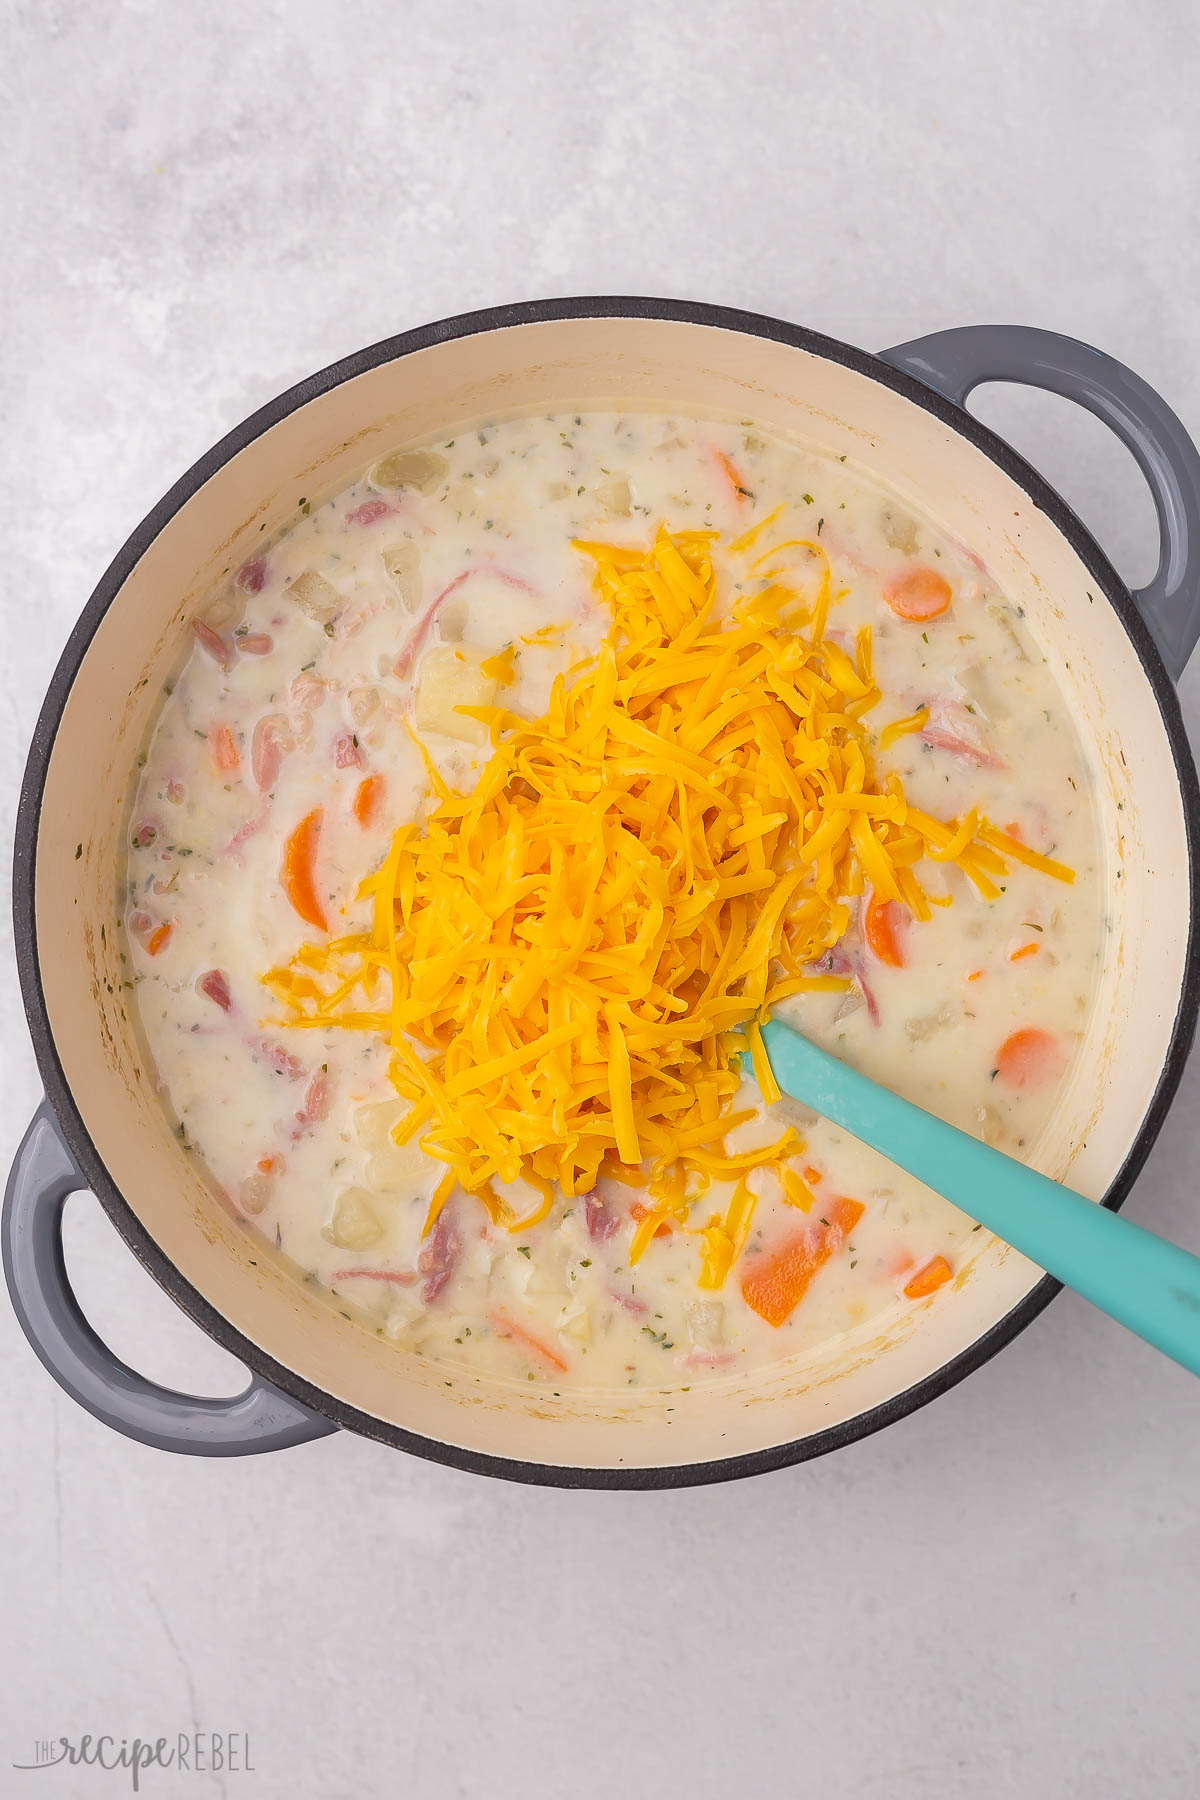 Top view of dutch oven with creamy ham and potato soup in it with shredded cheese being added on top.